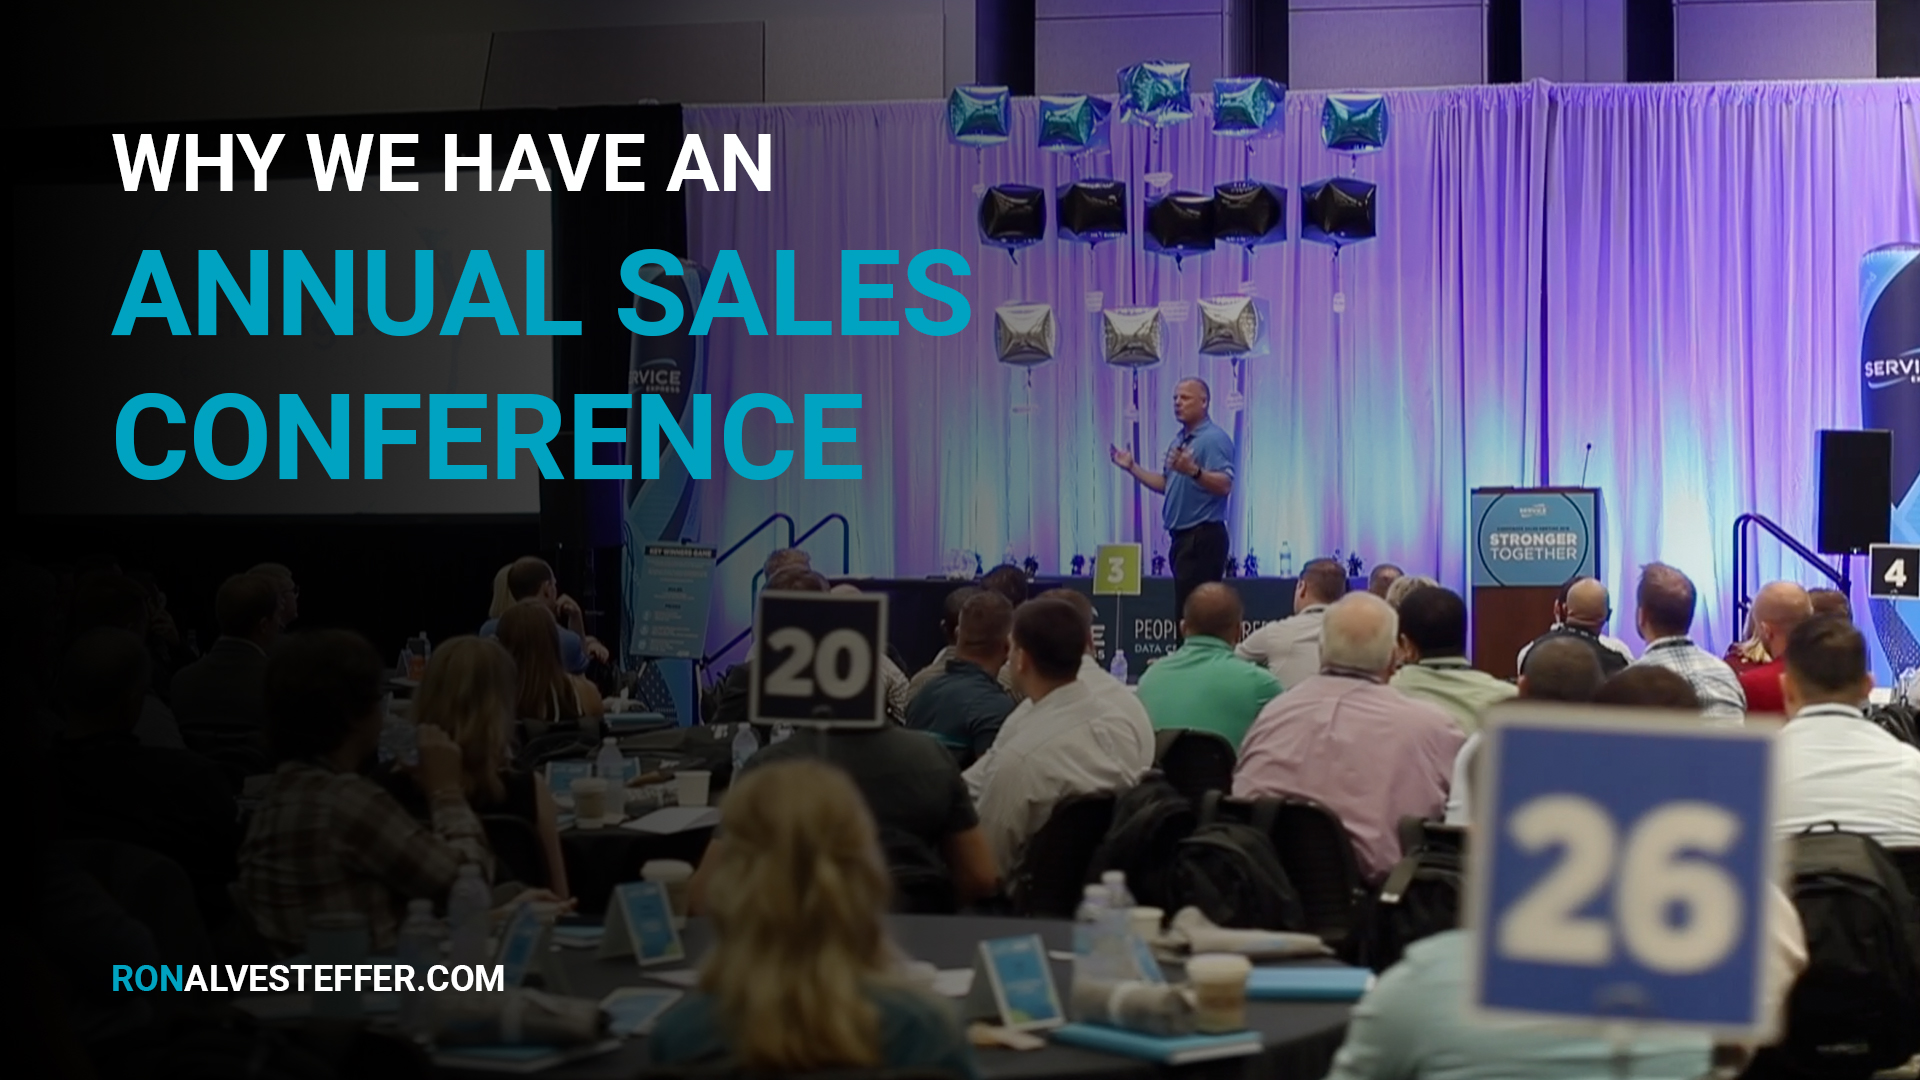 Why We Have an Annual Sales Conference